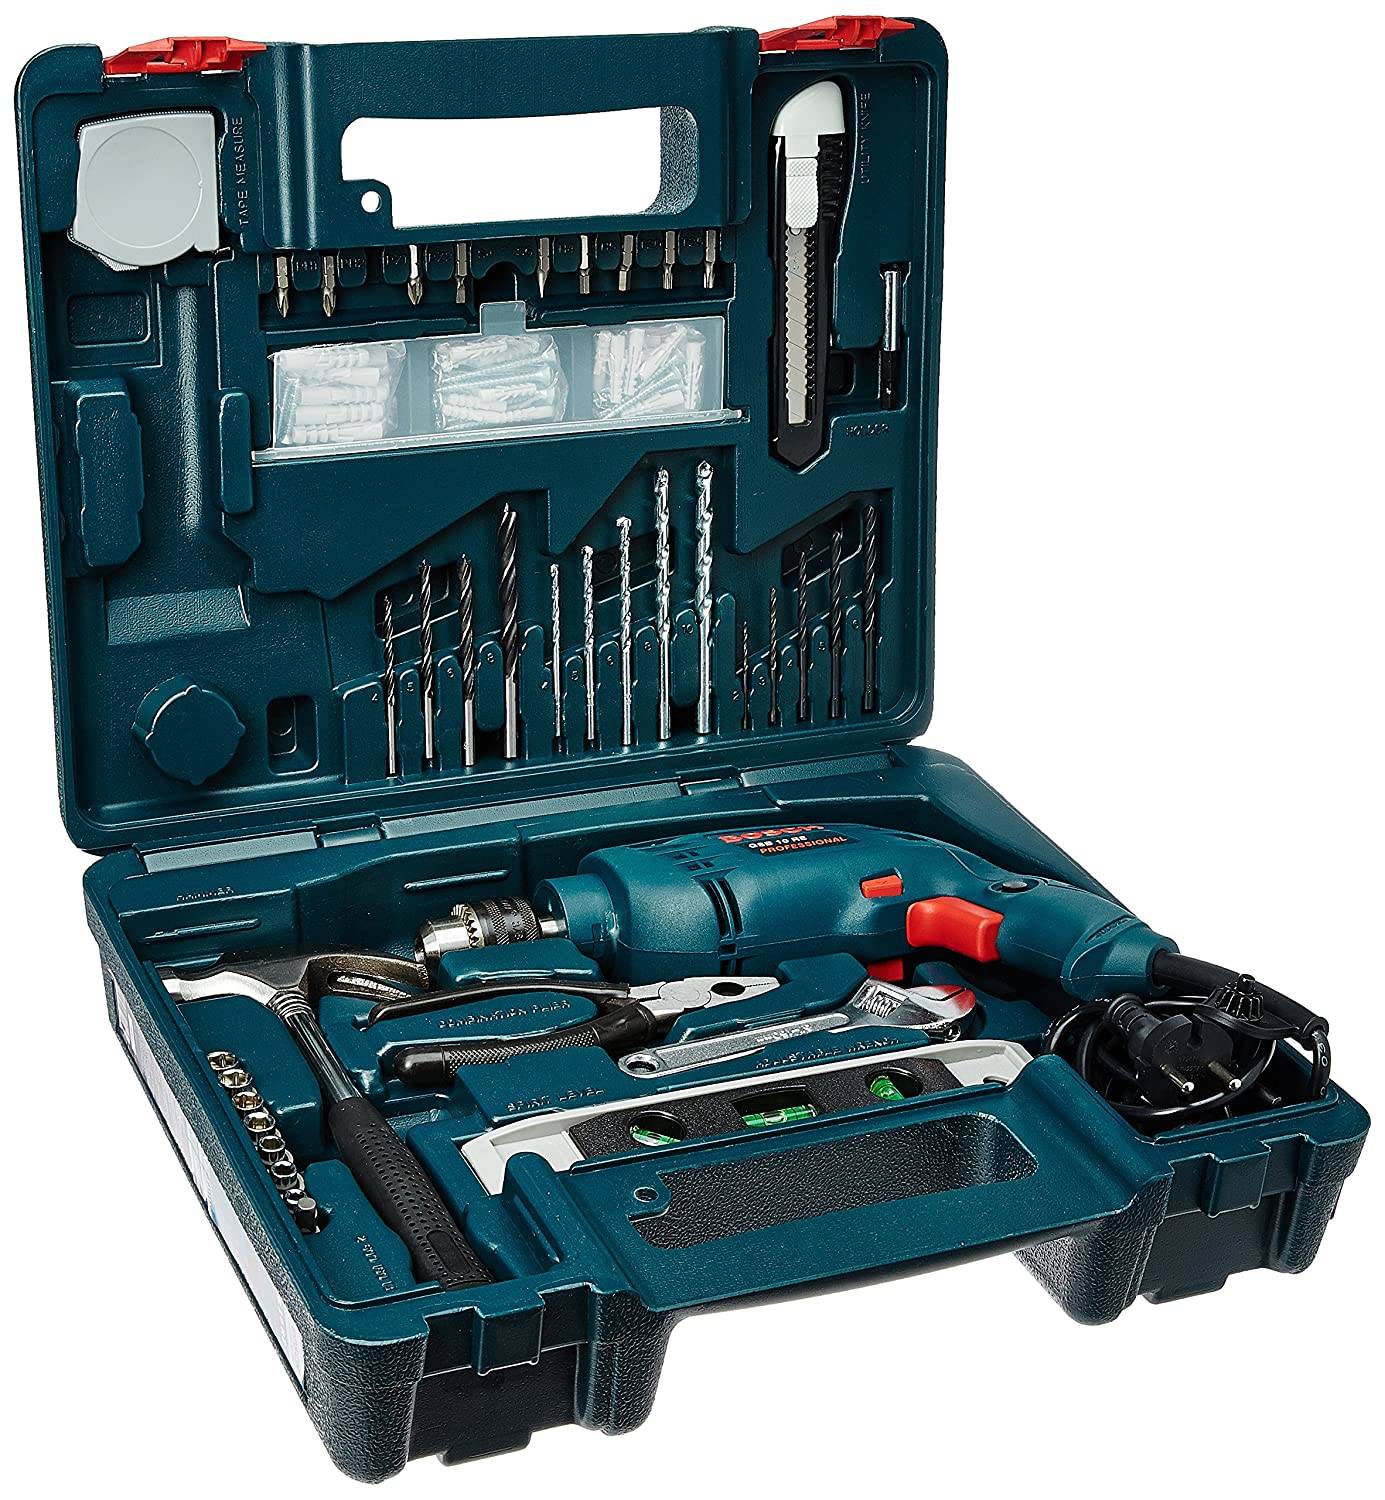 Buy Park Tool In India, Best Collection Of Tools